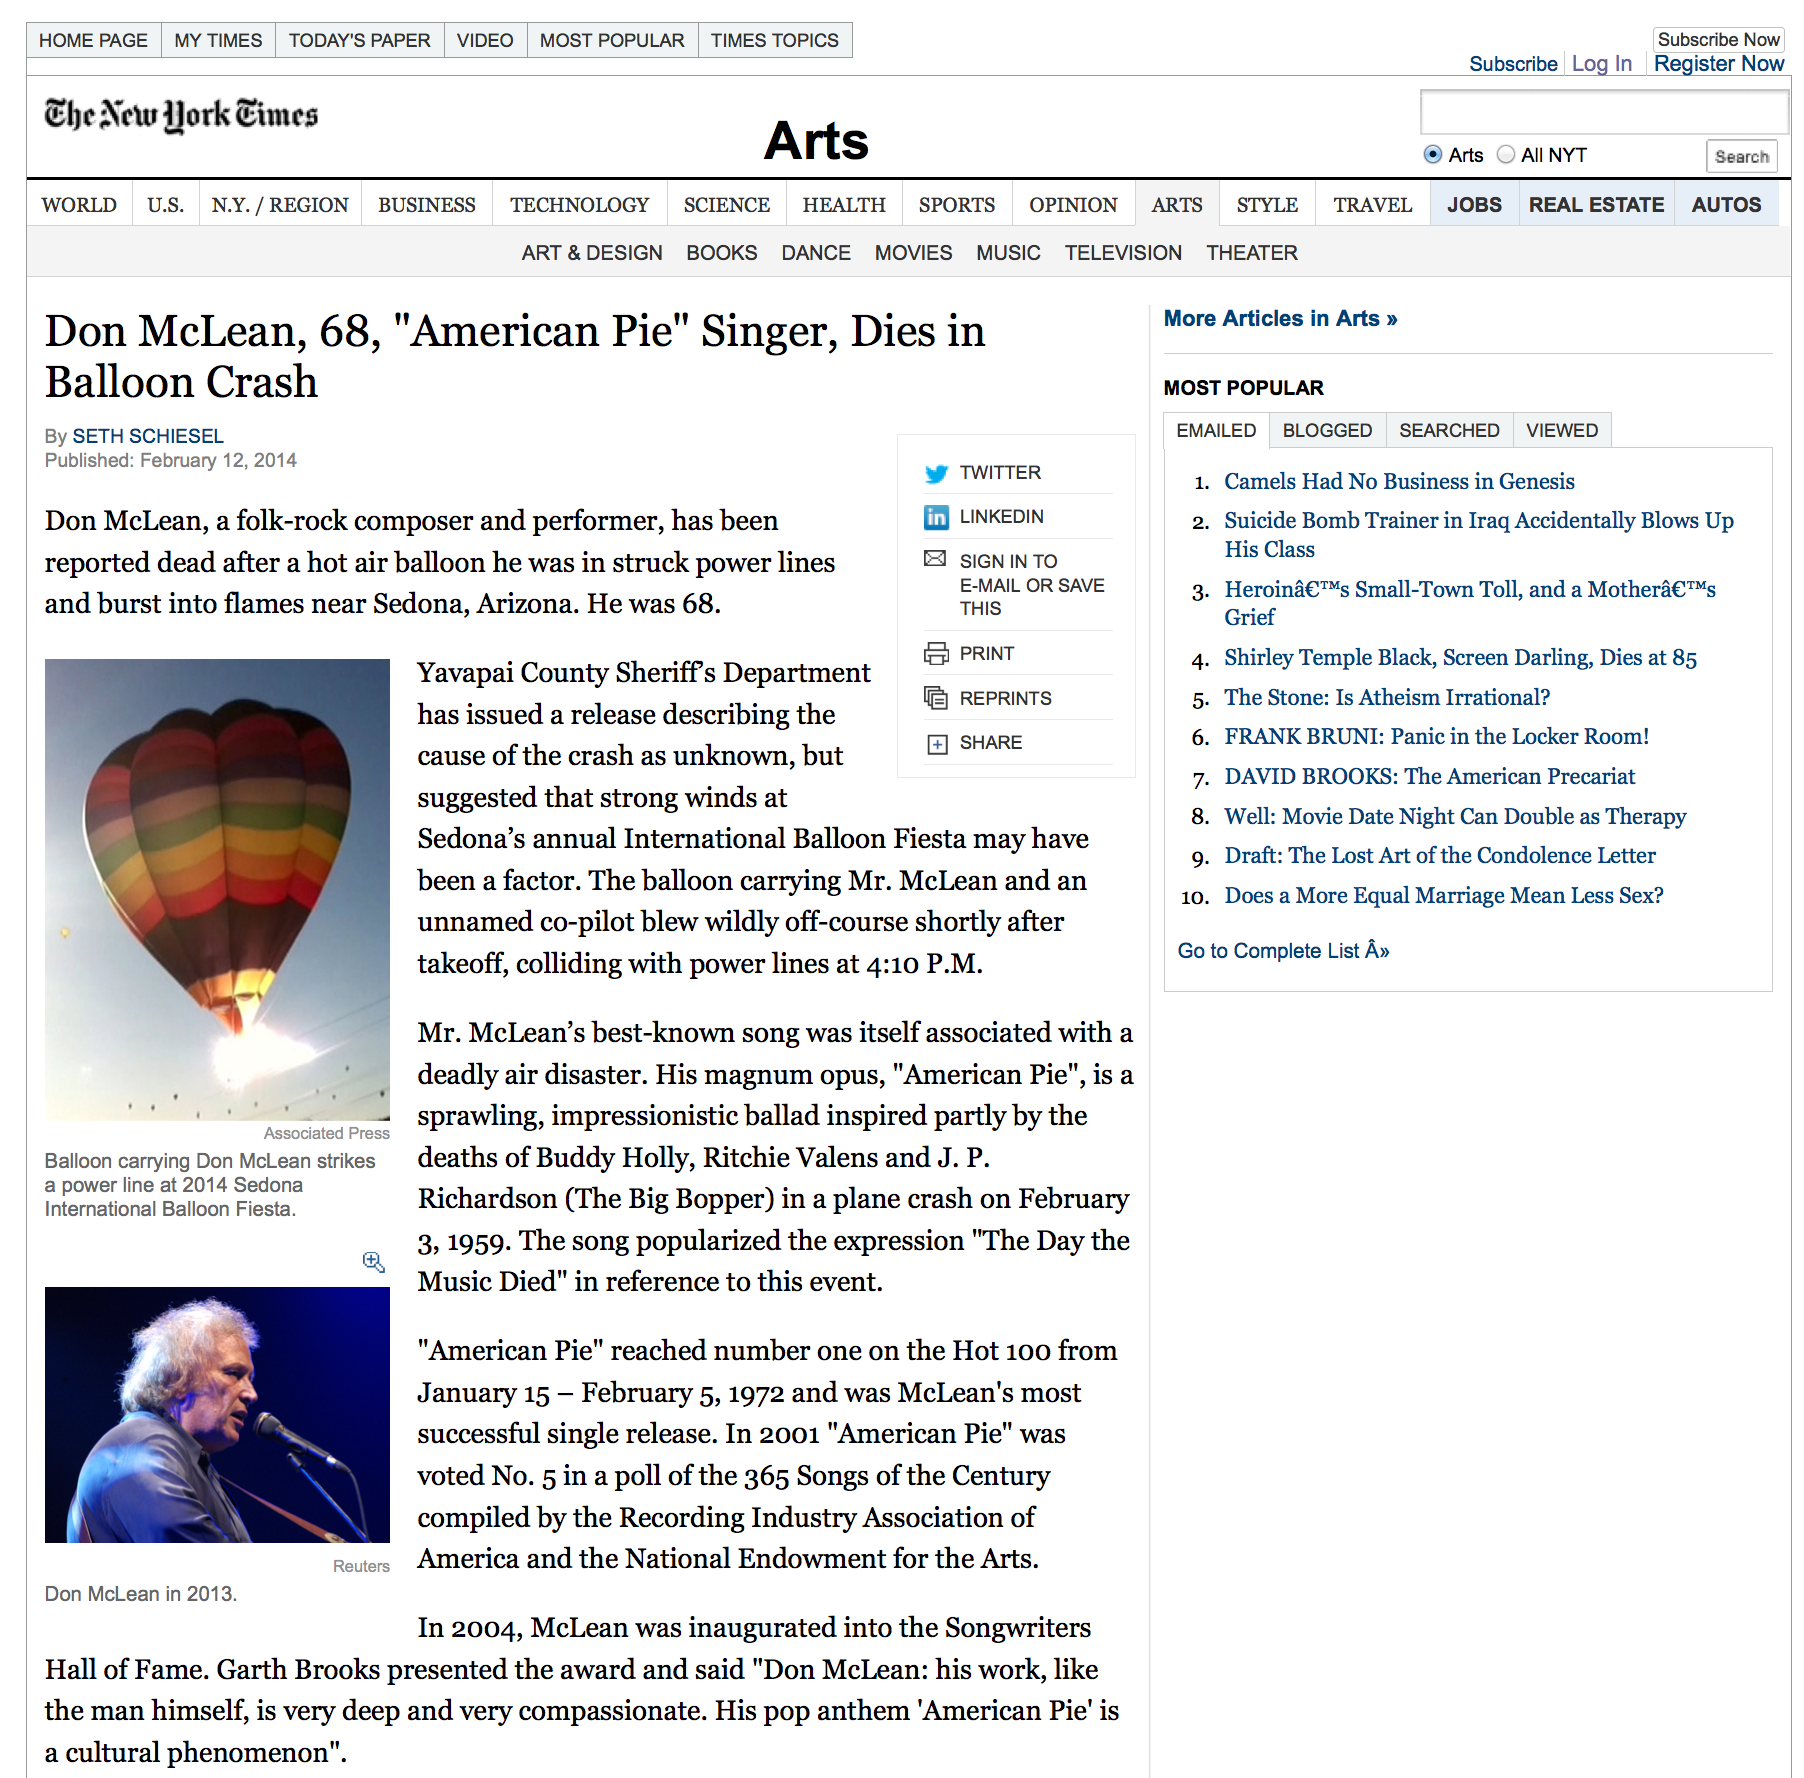 Screenshot on the fake New York Times story of Don McLean's death